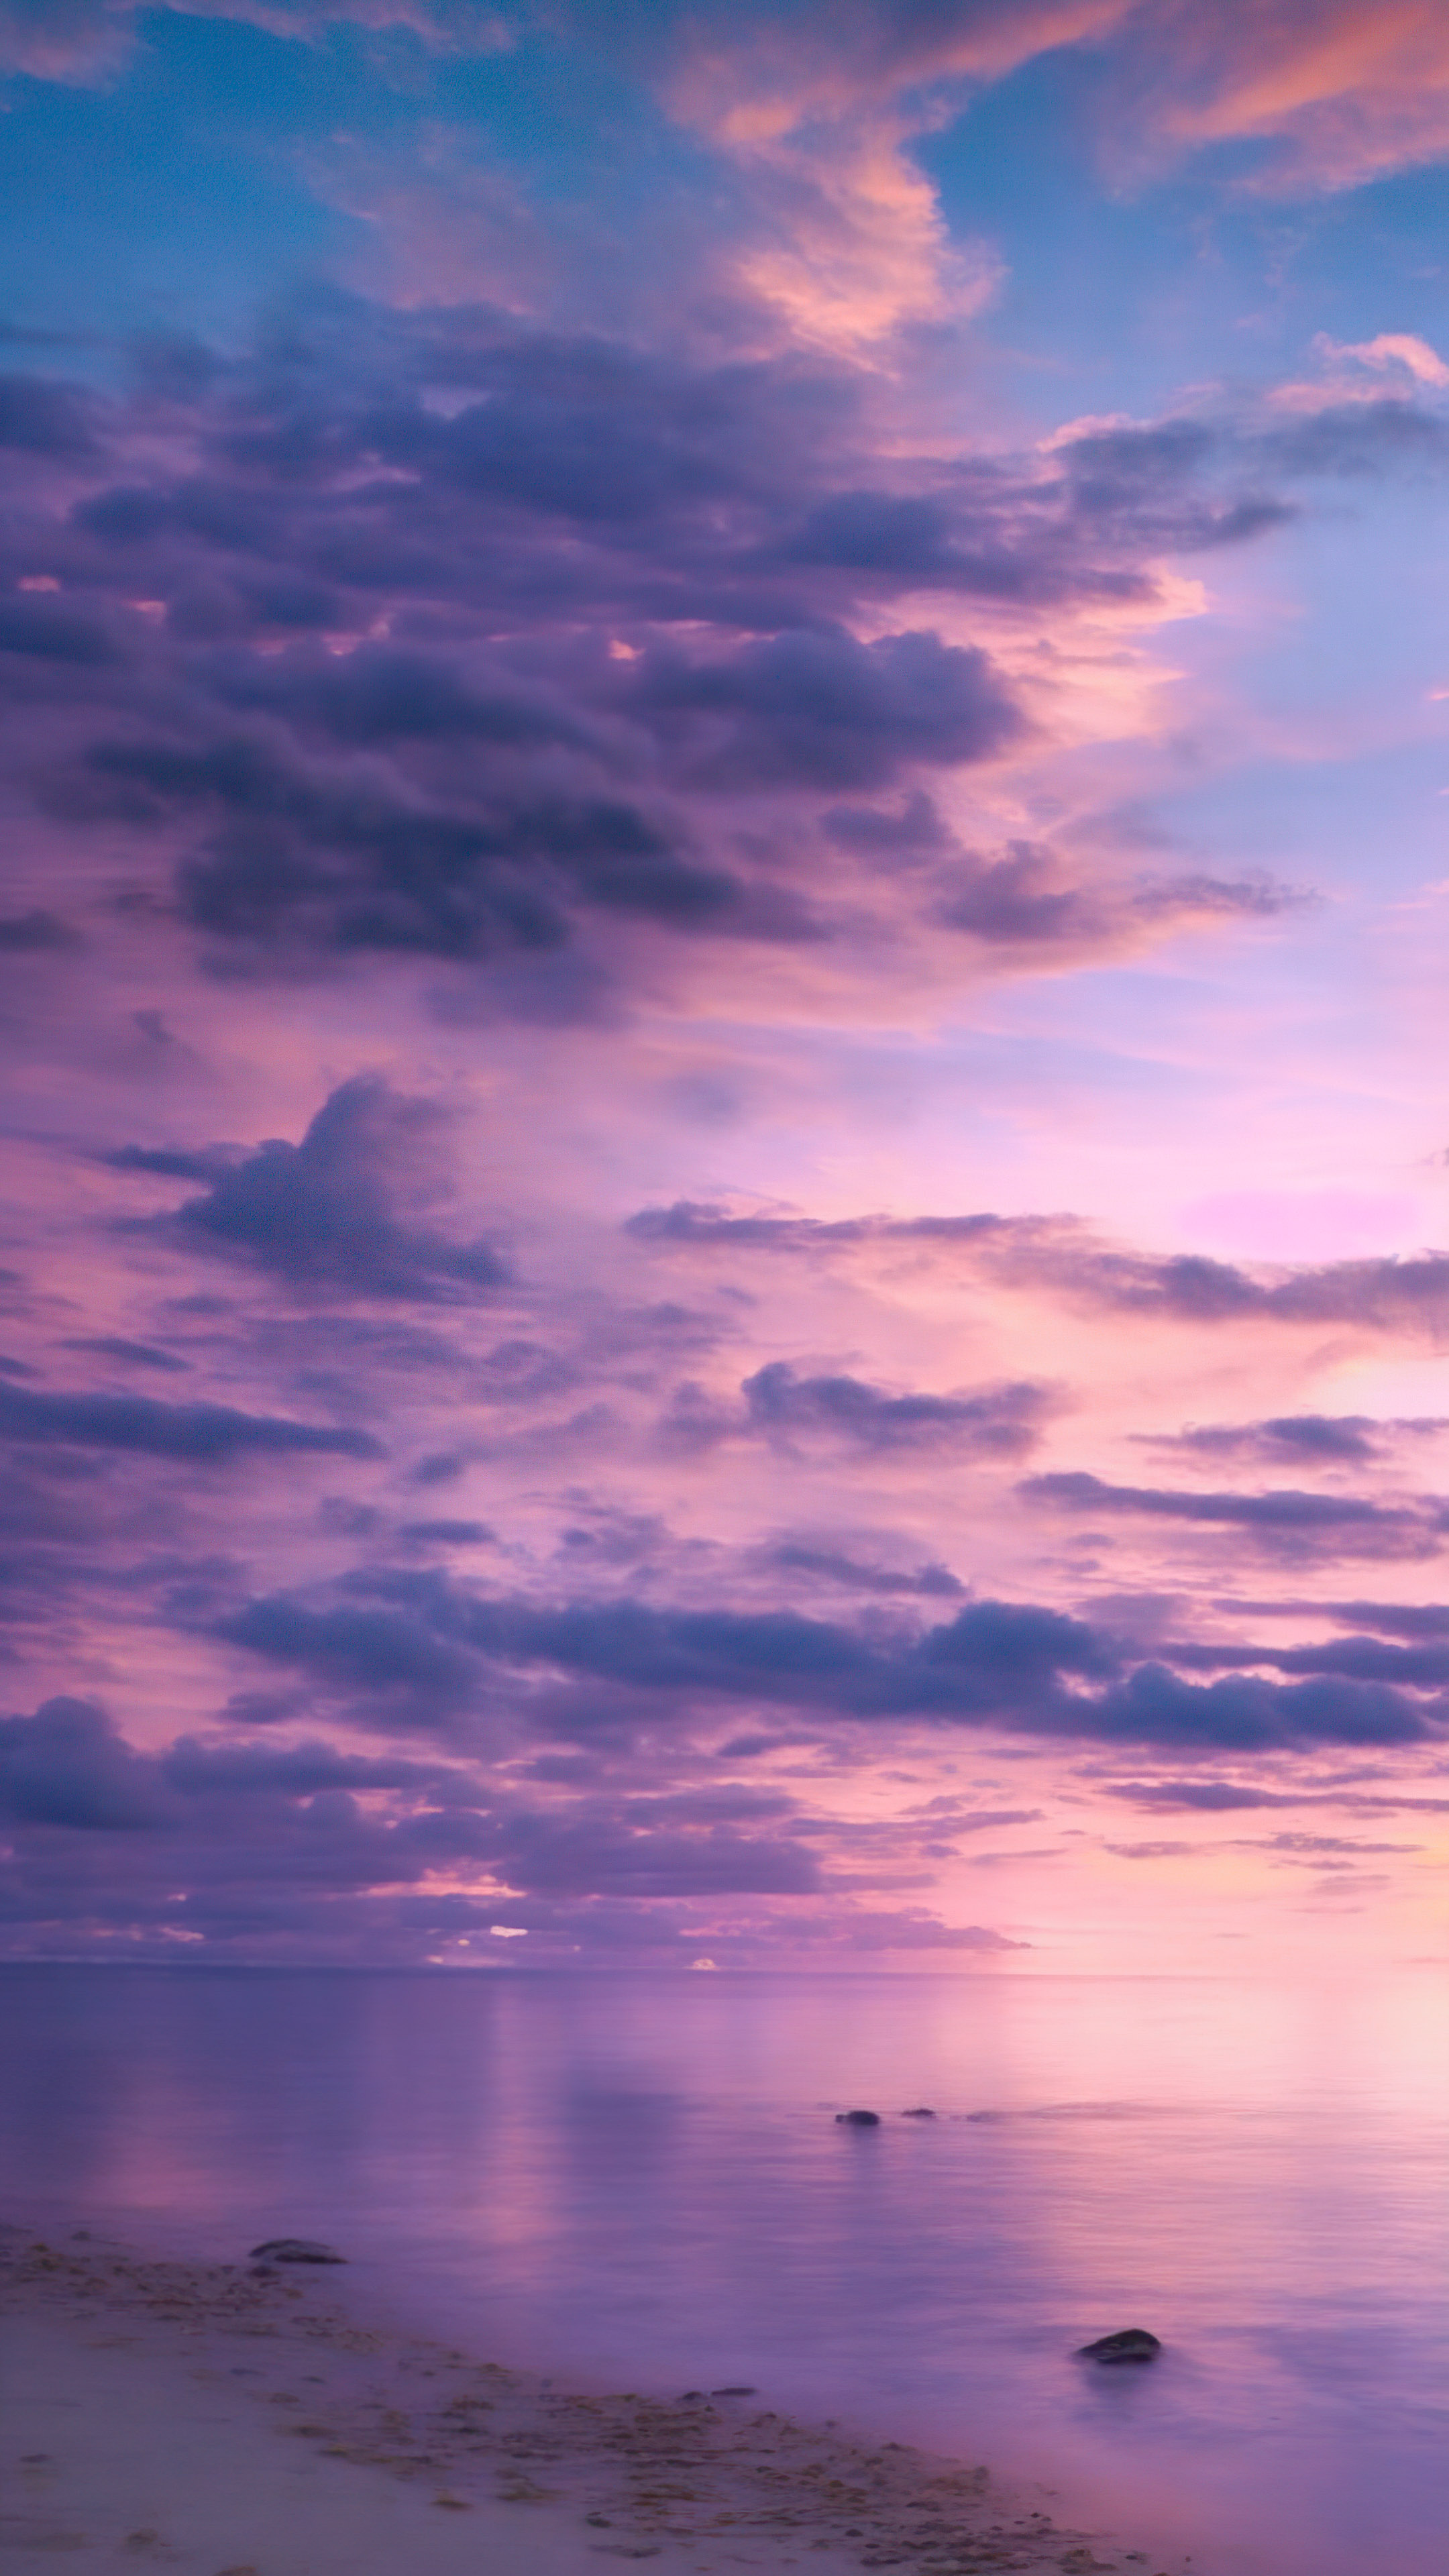 Admire the elegance of a tranquil beach at twilight, with the sky painted in shades of purple and pink, with pretty purple clouds wallpaper.